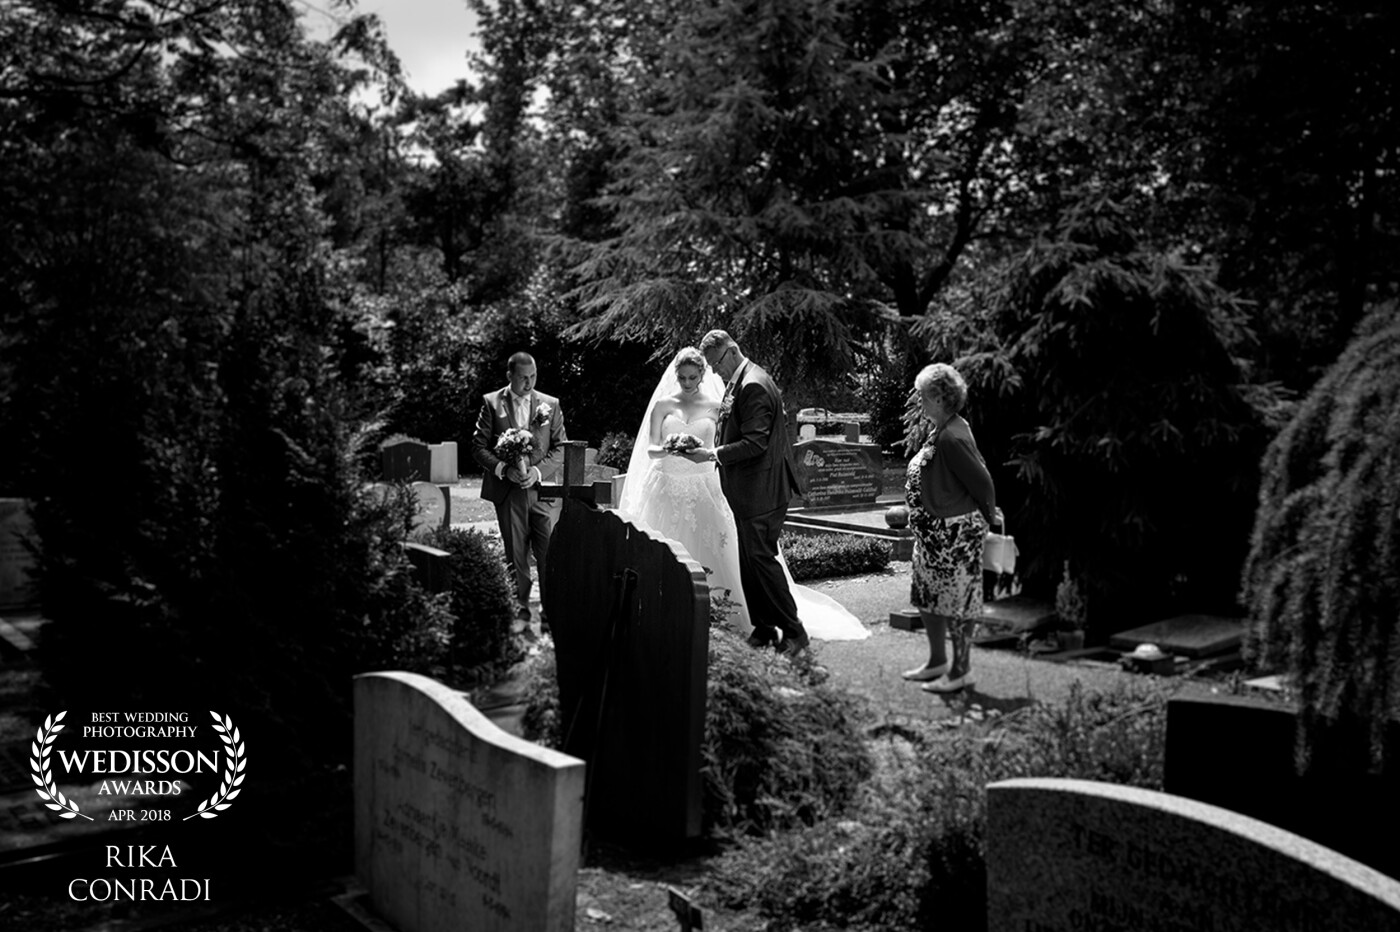 Emotions of remembering the ones that we love and have lost are also emotions which were important to this bride and groom on their wedding day. I highly respect their visit to their lost grandparents.